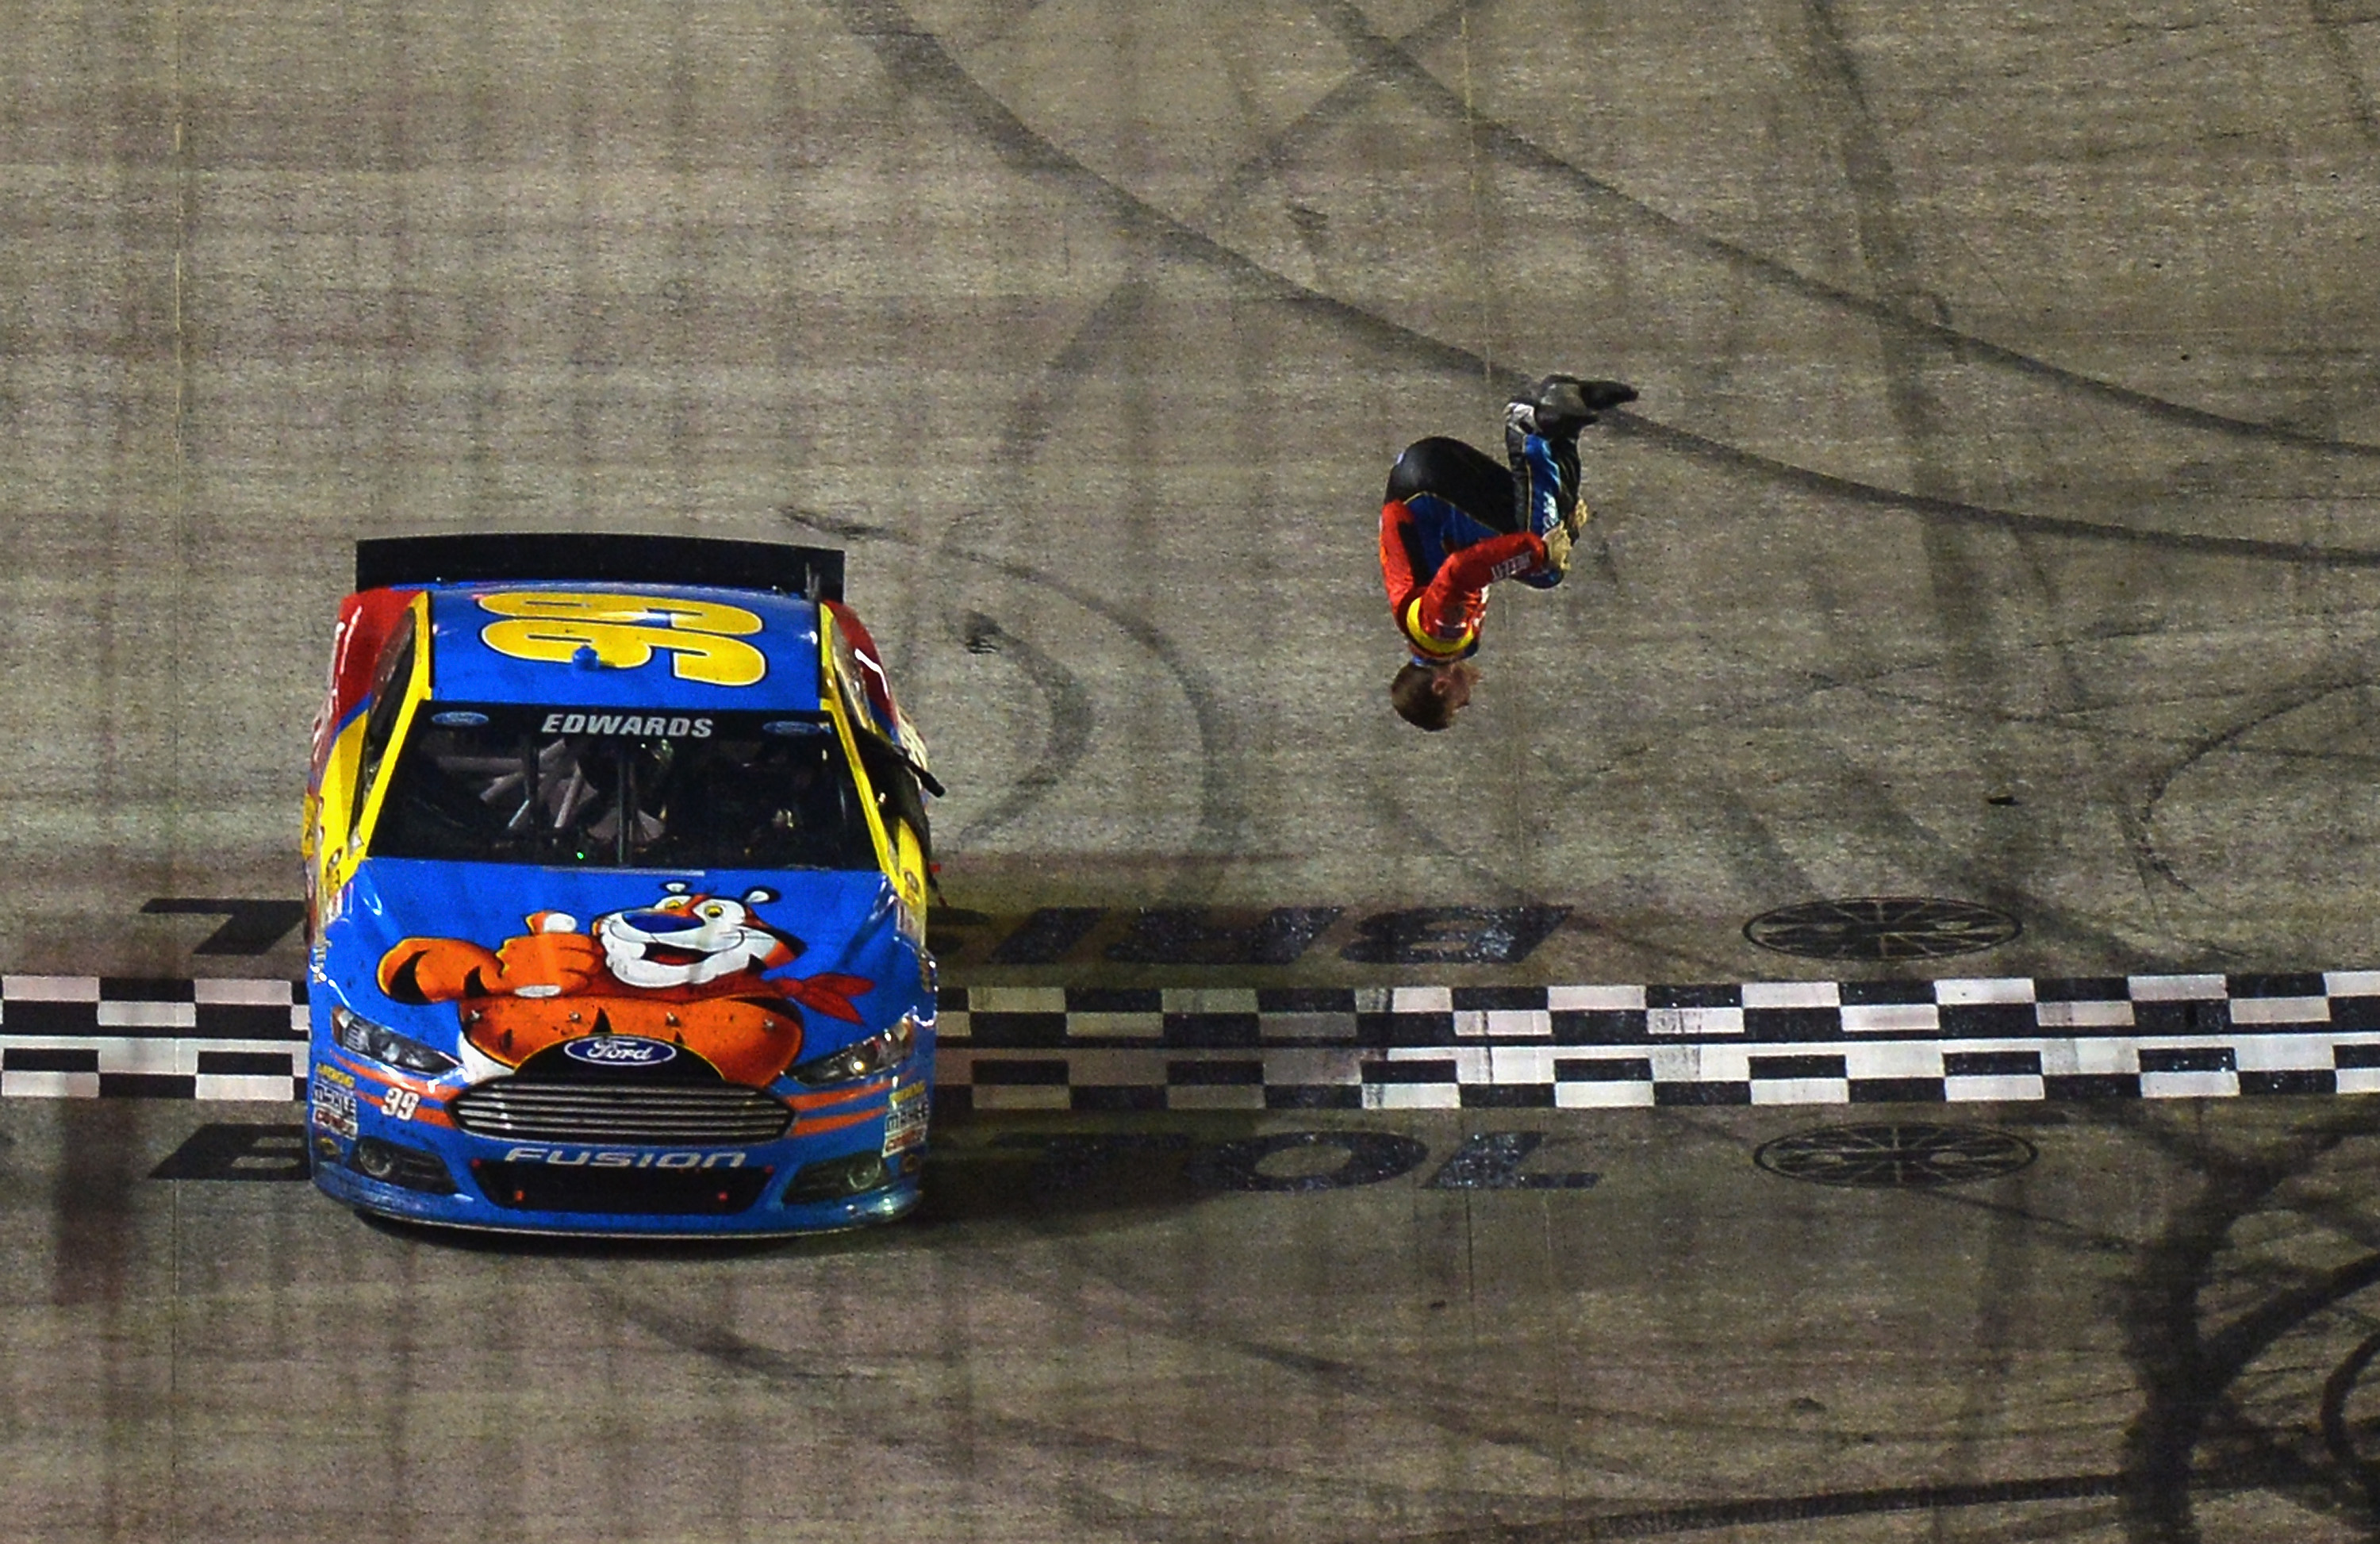 Another marathon of a night in racing saw Carl Edwards flipping out in the end.